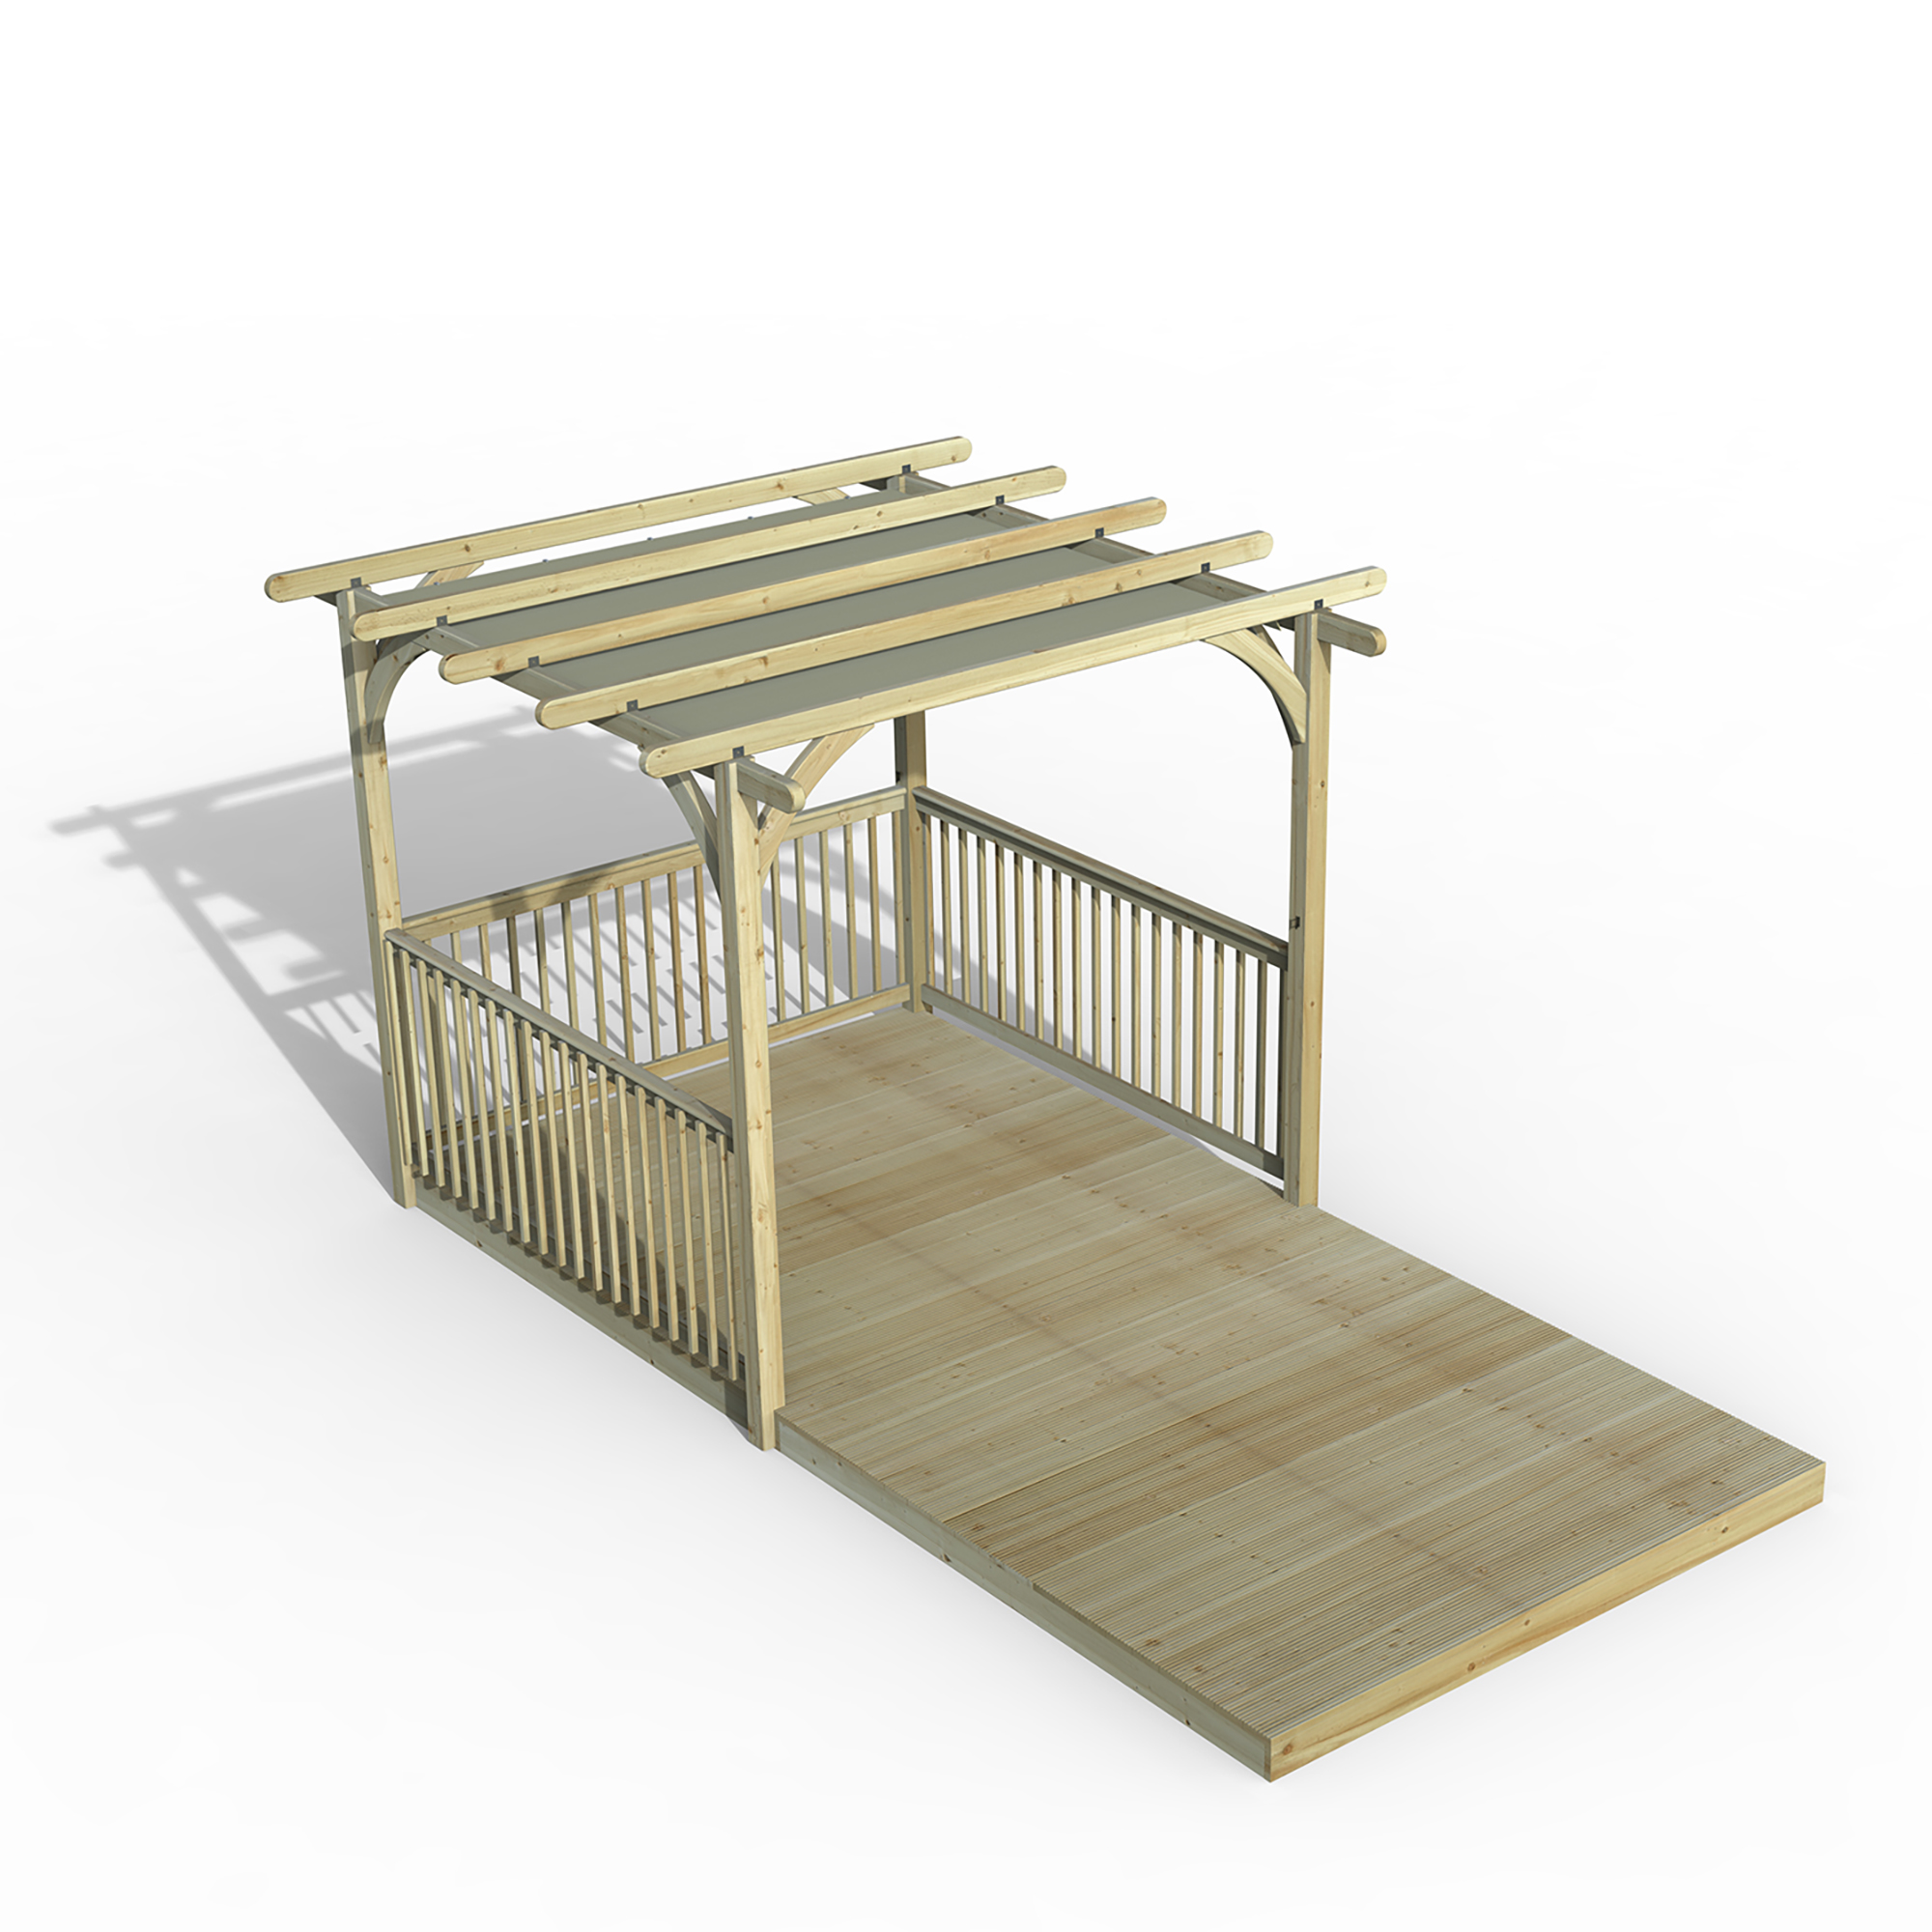 Forest Garden 2.4 x 4.8m Ultima Pergola and Decking Kit with 3 x Balustrade and Canopy